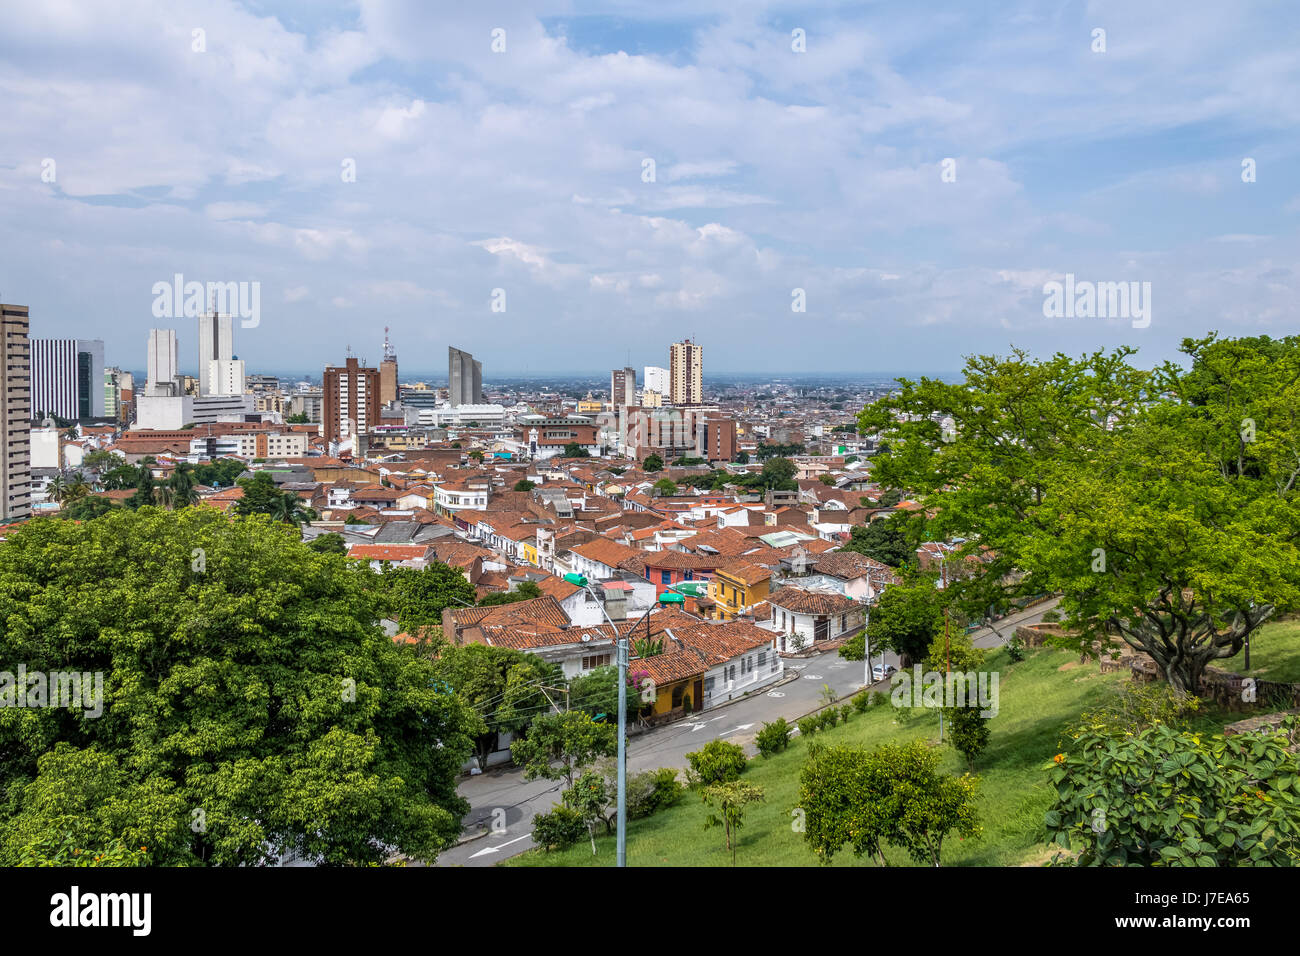 Aerial view of Cali city - Cali, Colombia Stock Photo